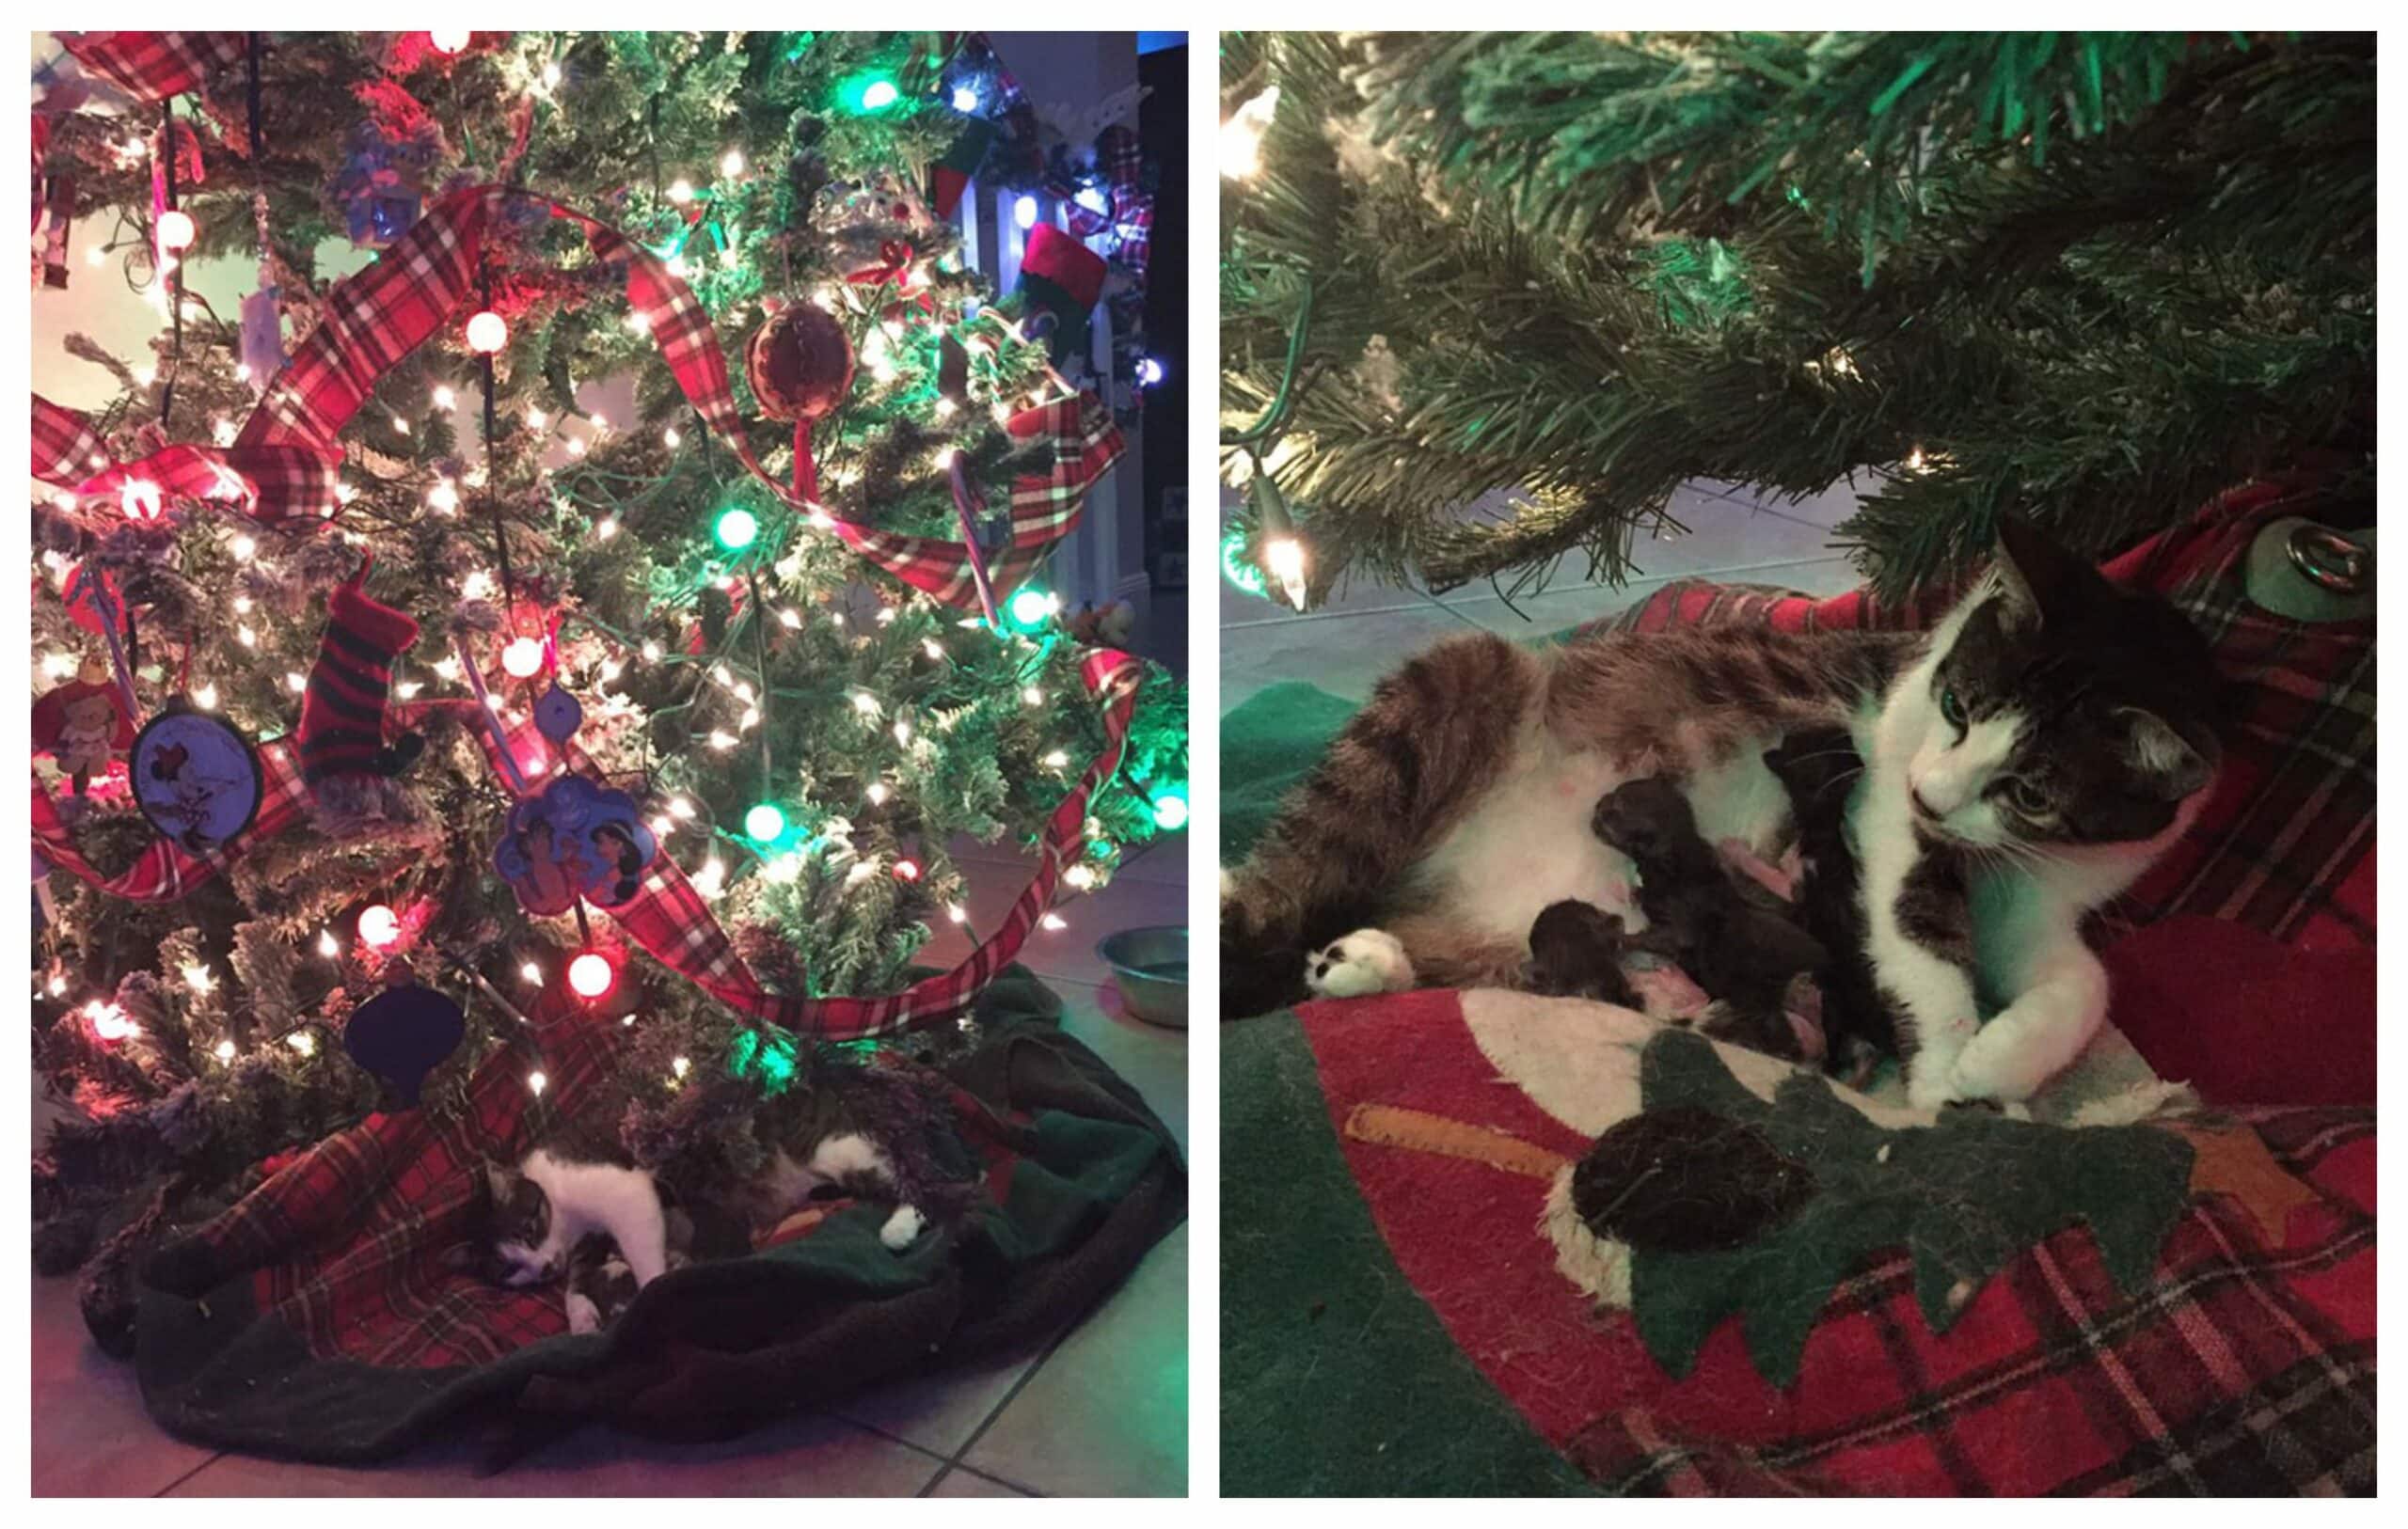 Under a Christmas tree a rescued cat unexpectedly gave birth